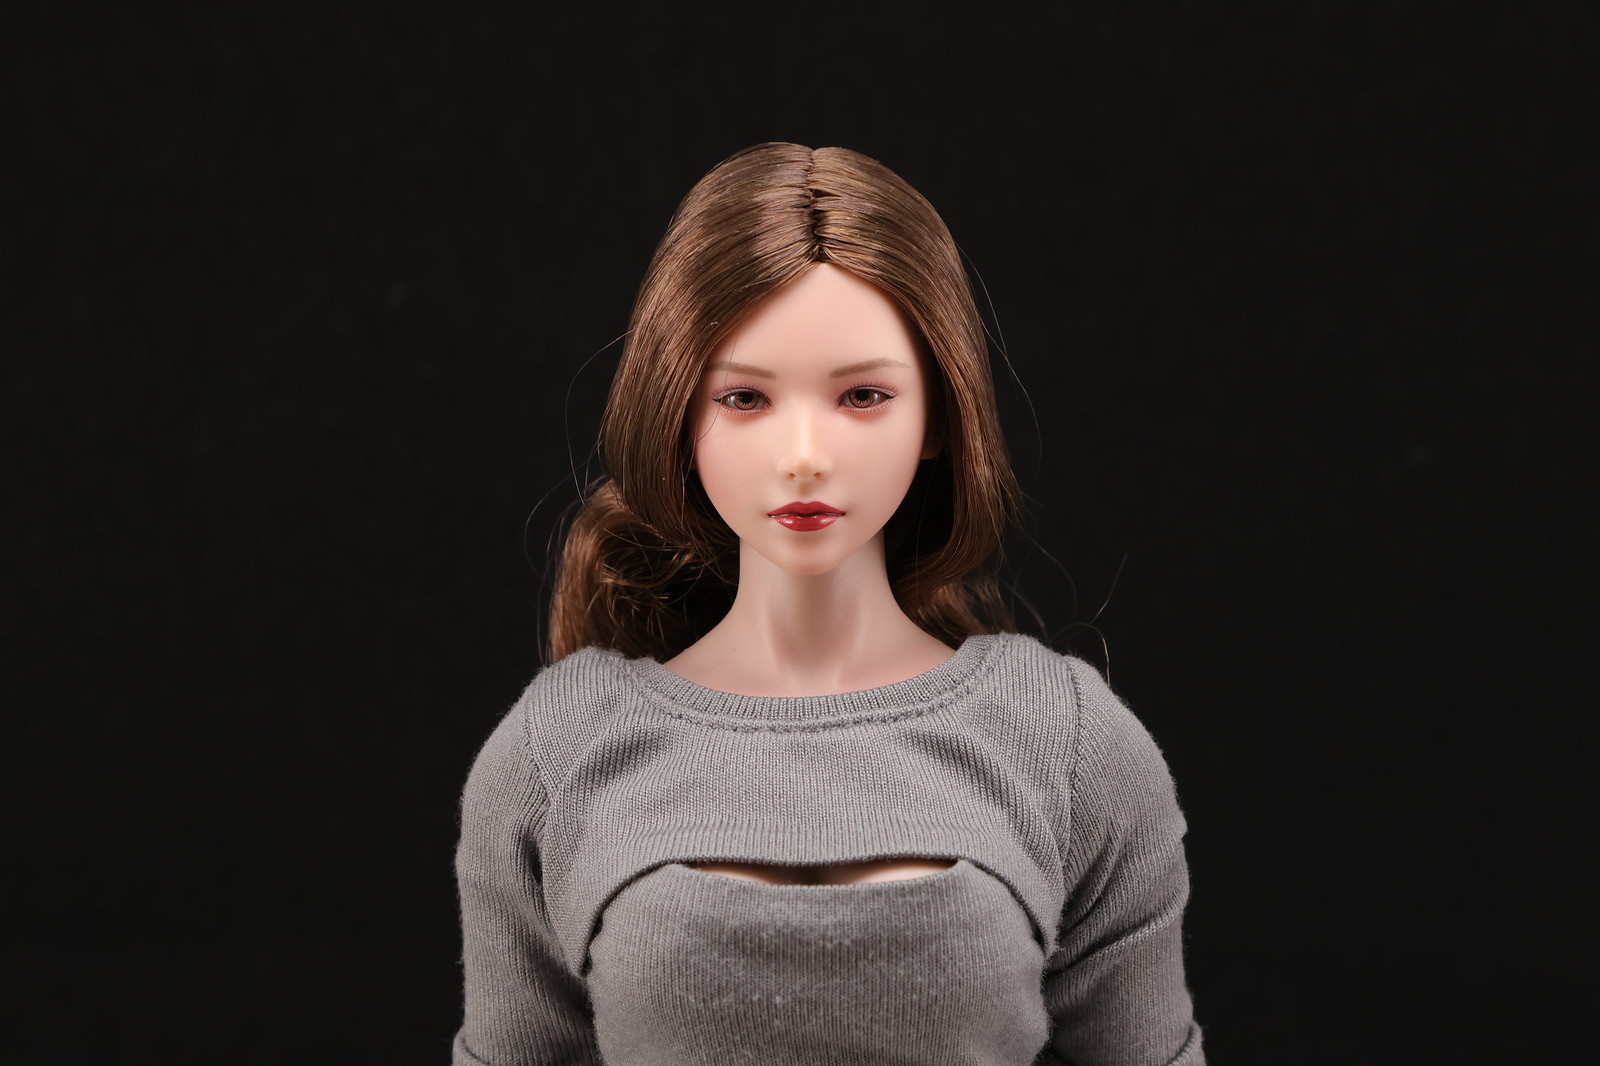 female - NEW PRODUCT: i8TOYS "Xiaoqi Yuki" Movable Eyeball Head Sculpture (I8-H003) - Page 2 53154230730_c475674410_h